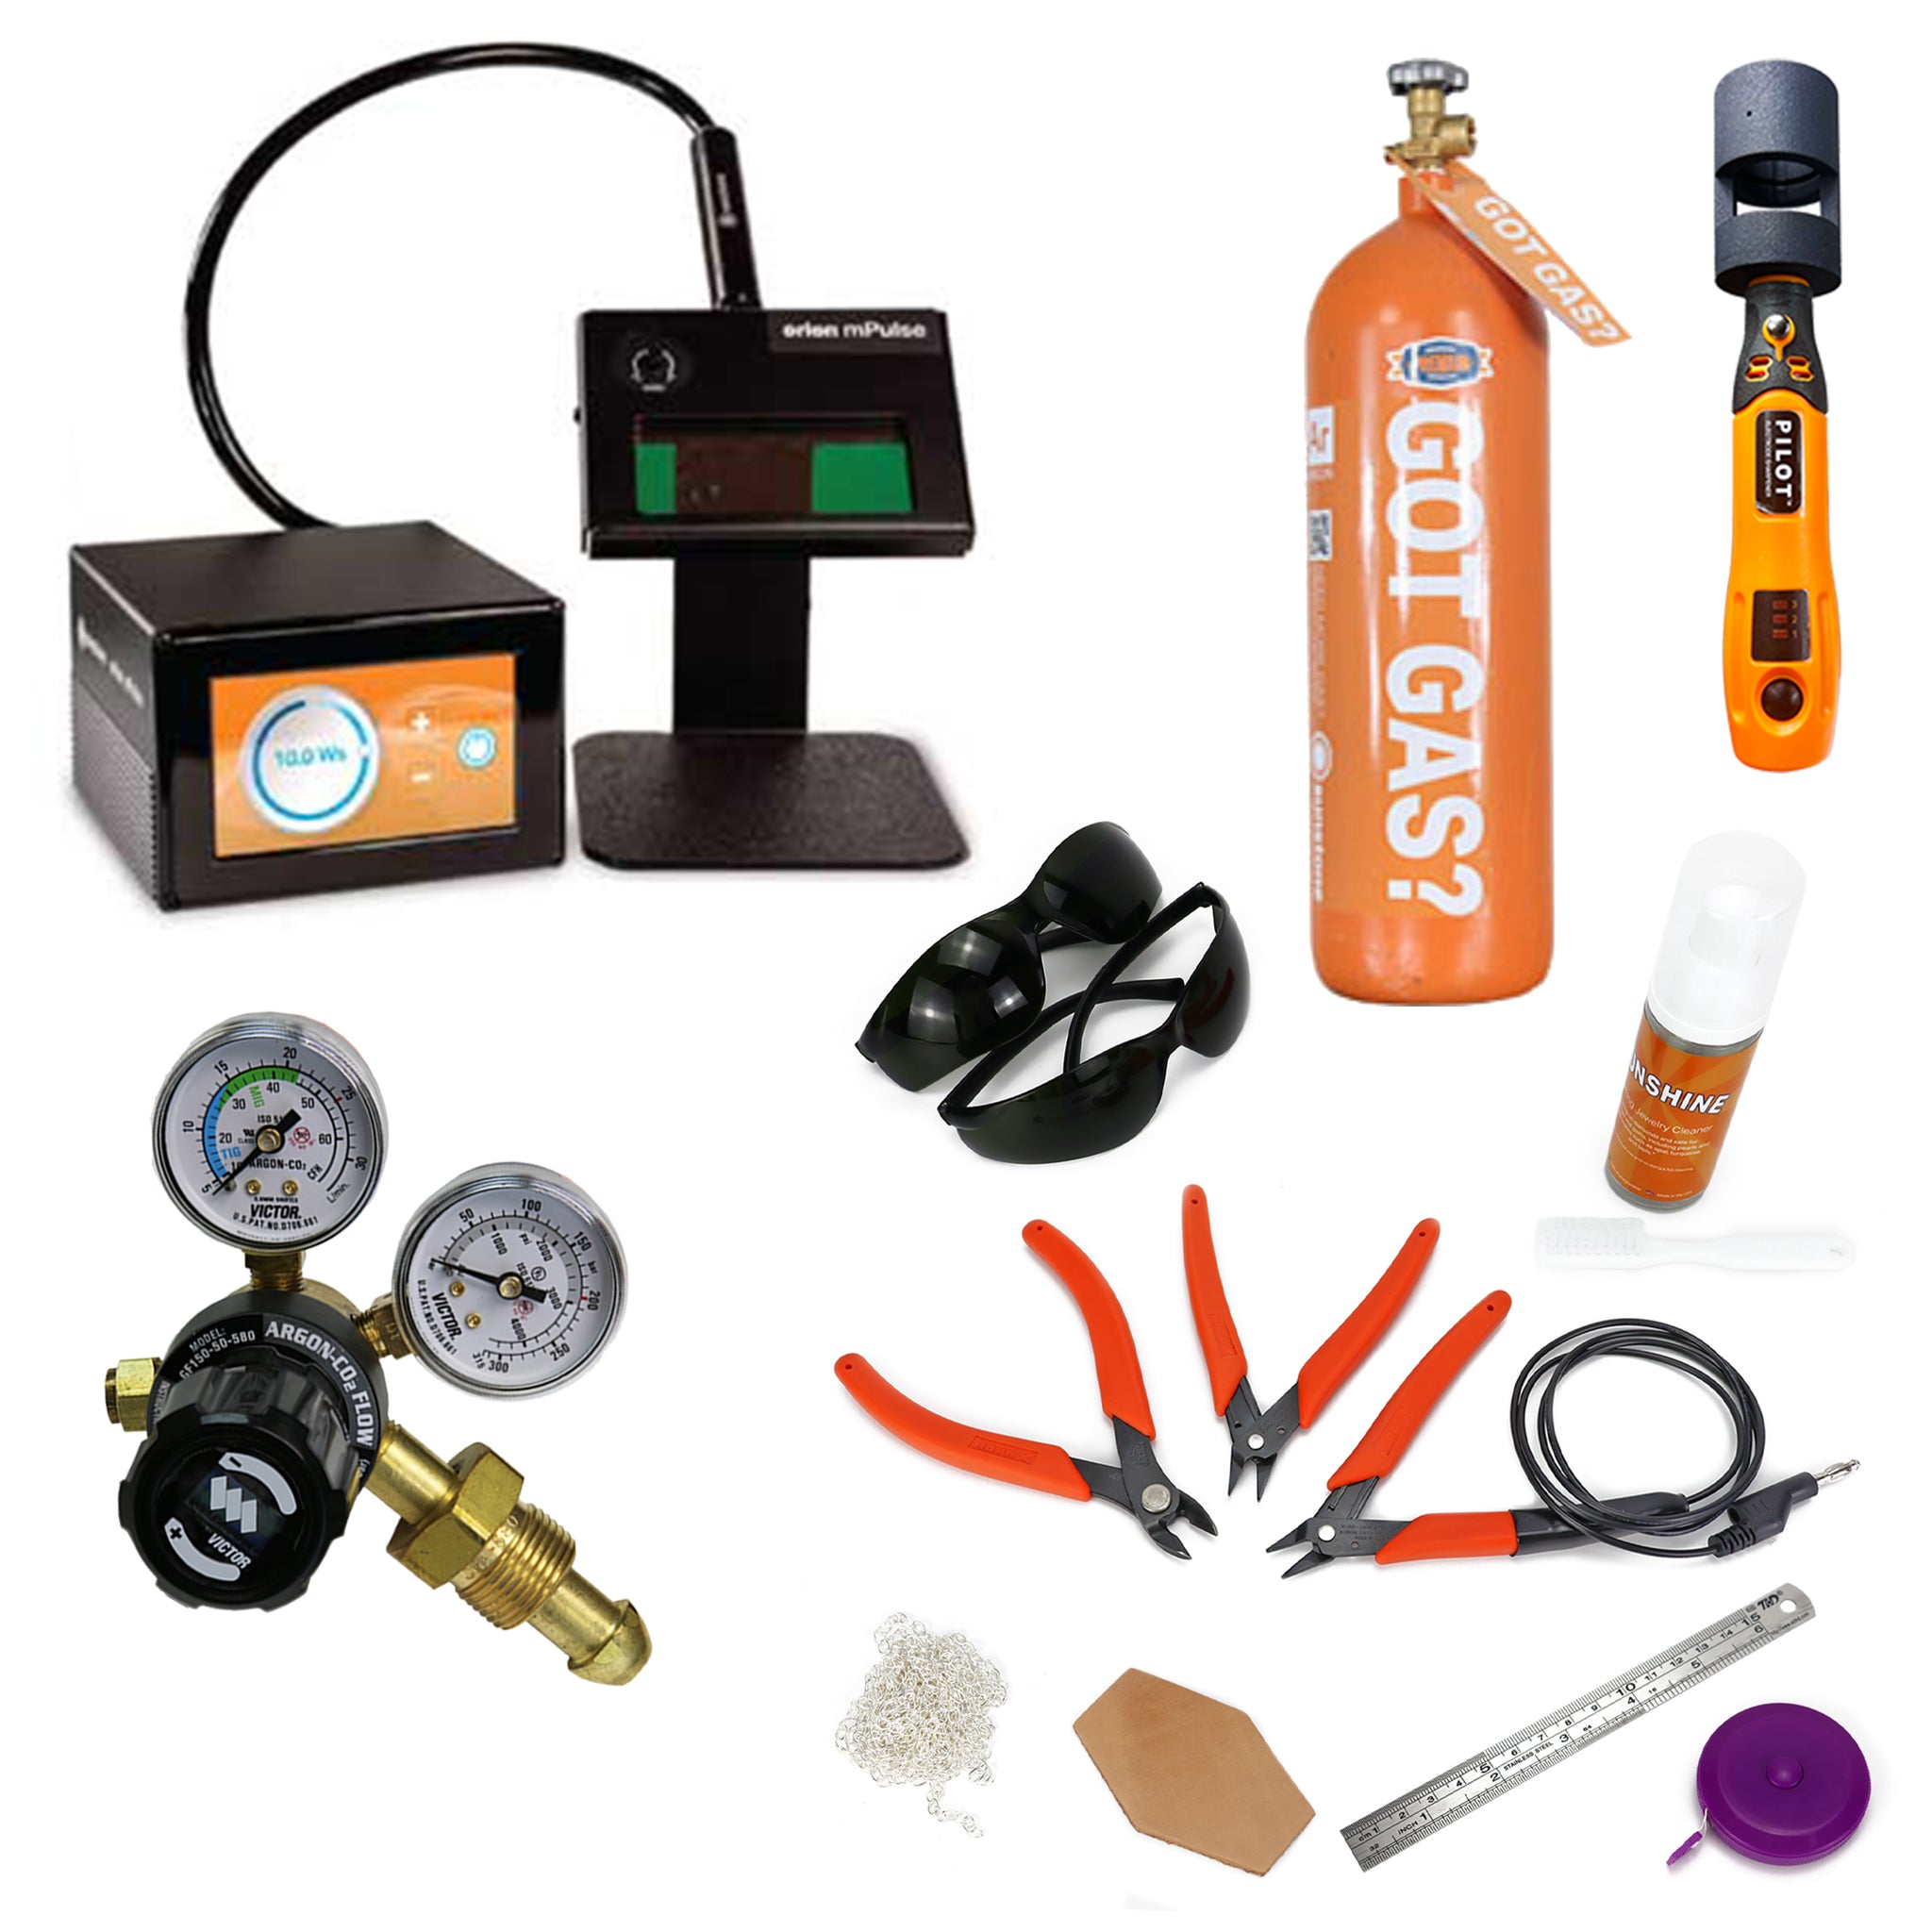 Gemex Starter Kit - Make Your Own Jewelry » Cheap Delivery